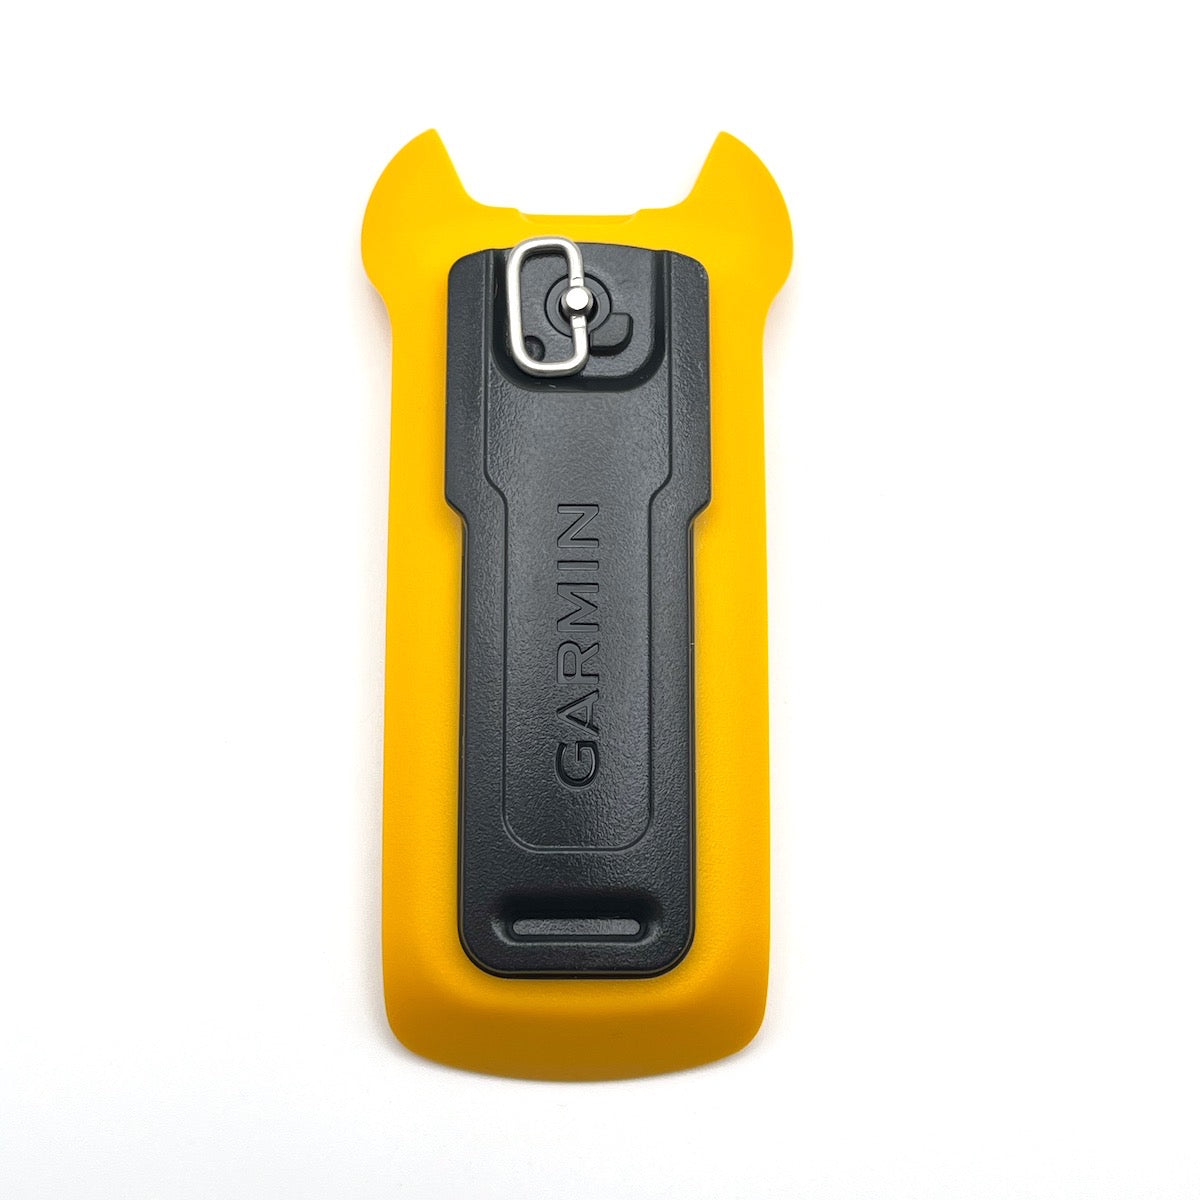 New Battery Cover for Garmin eTrex 10 yellow replacement part repair (10 20 30 )